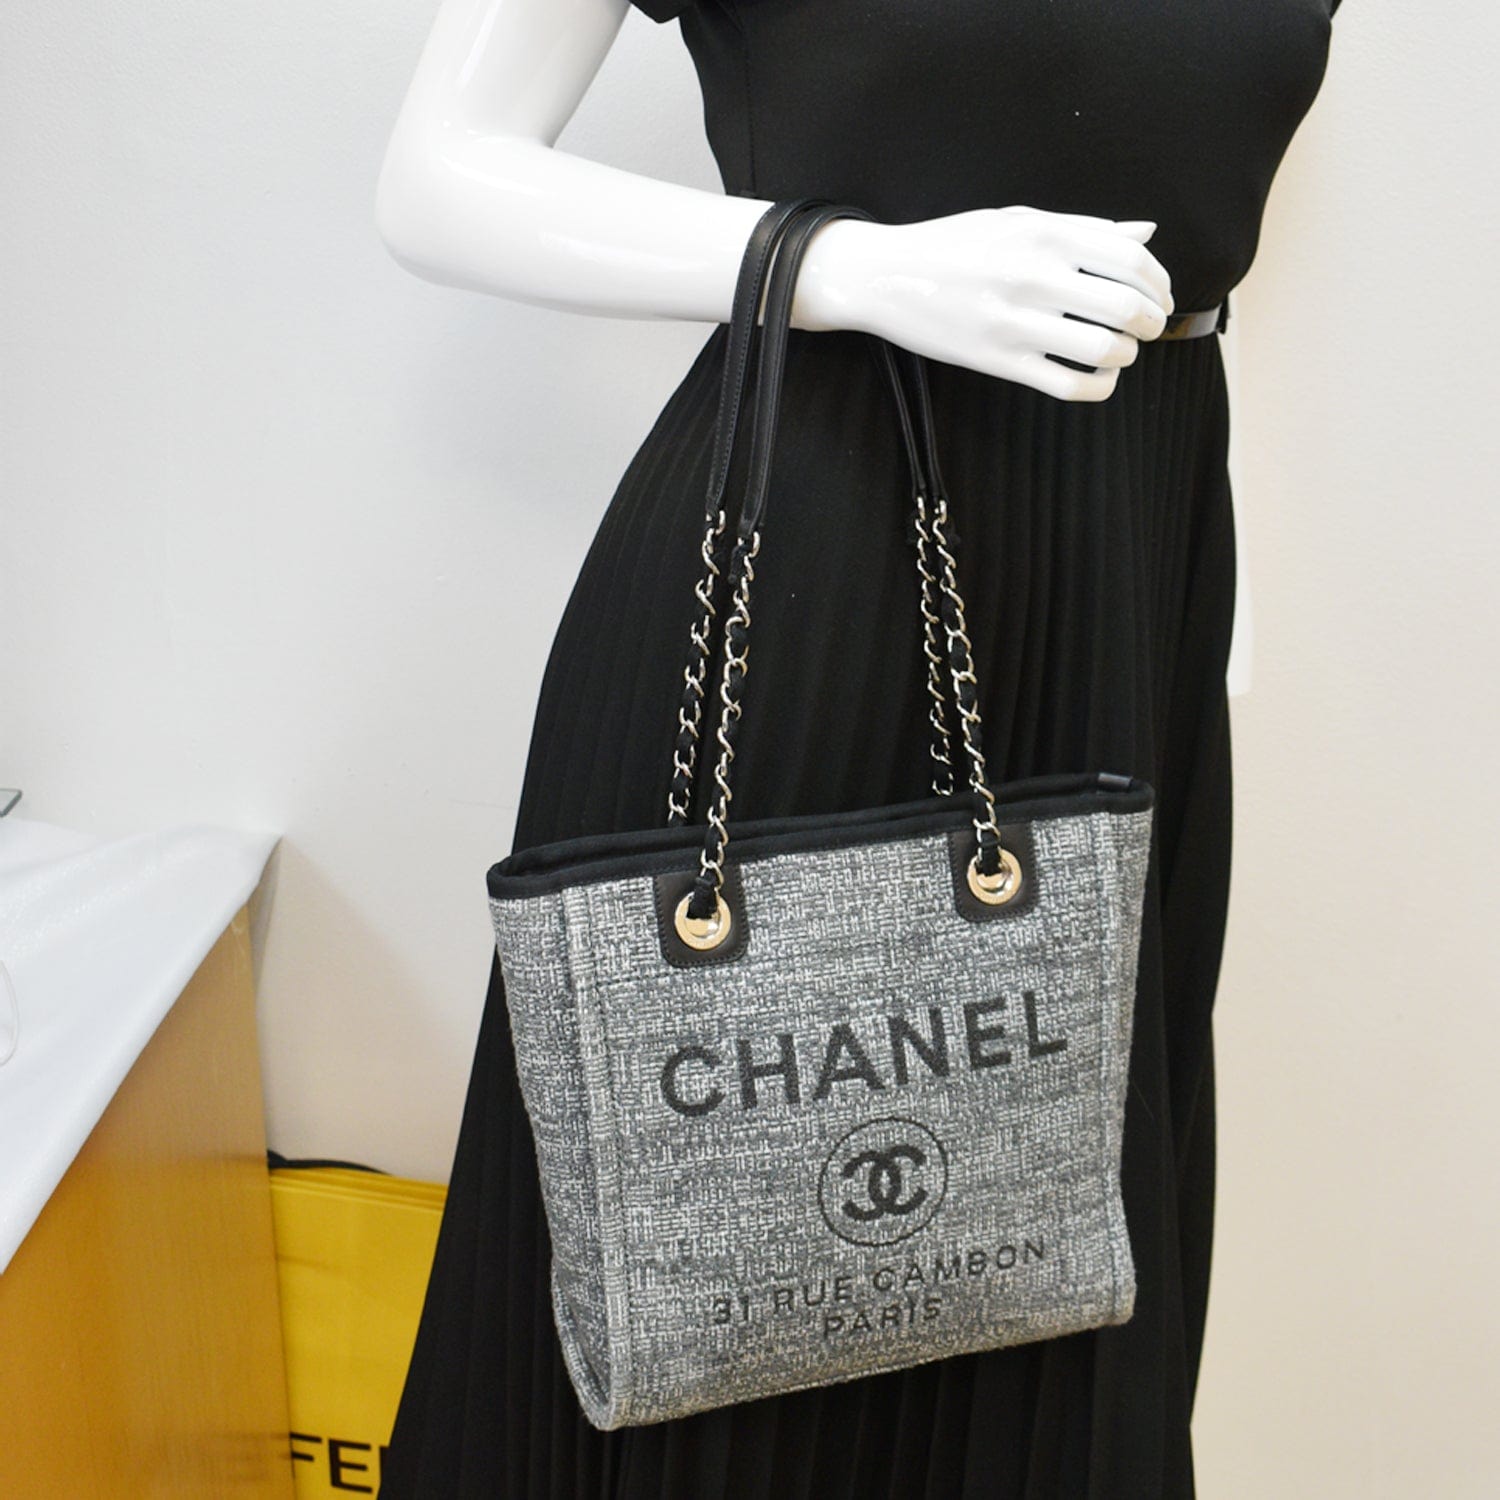 CHANEL DEAUVILLE TOTE BAG